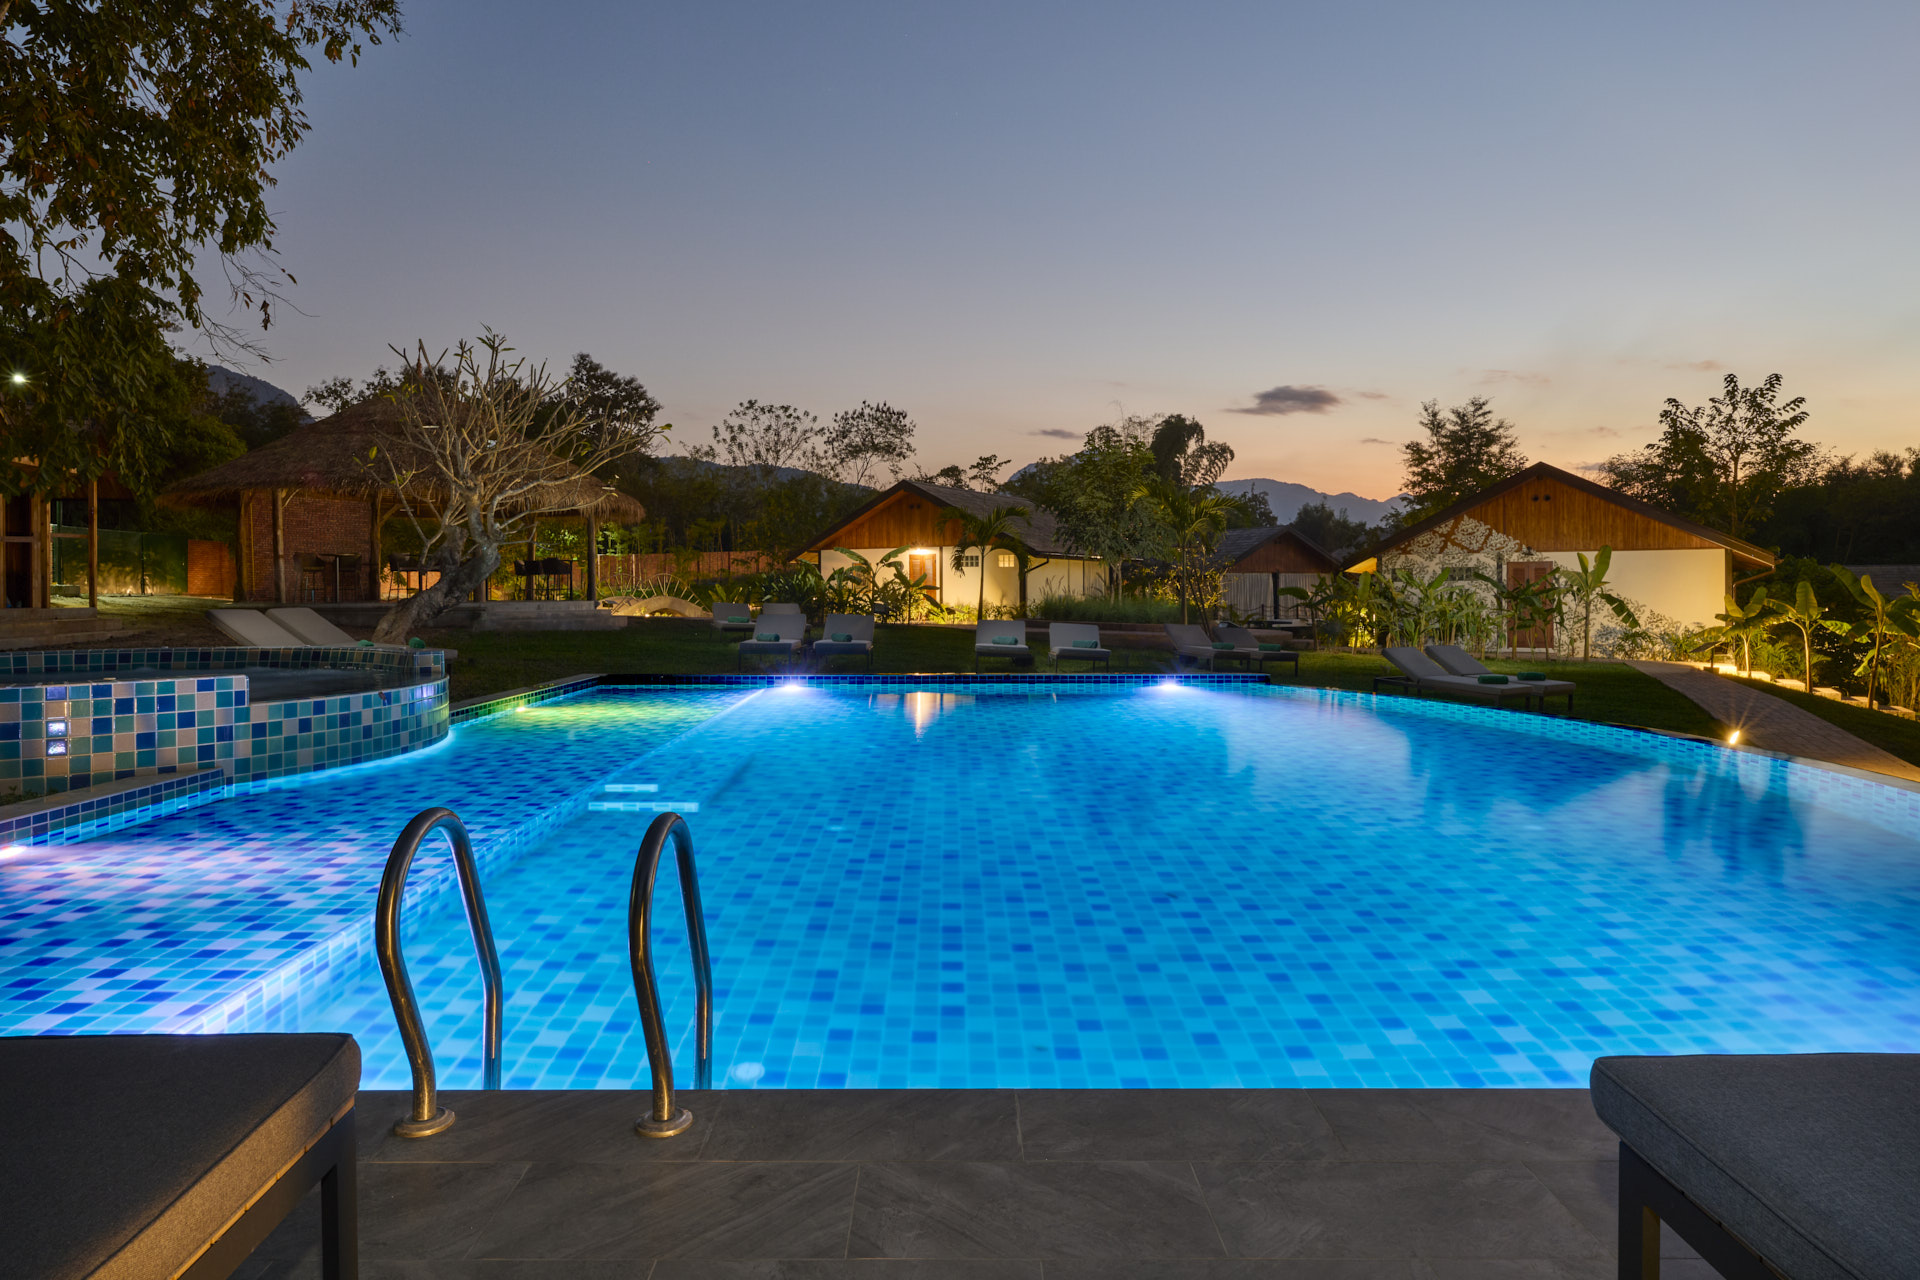 The pool in Luang Prabang is lit up at dusk.